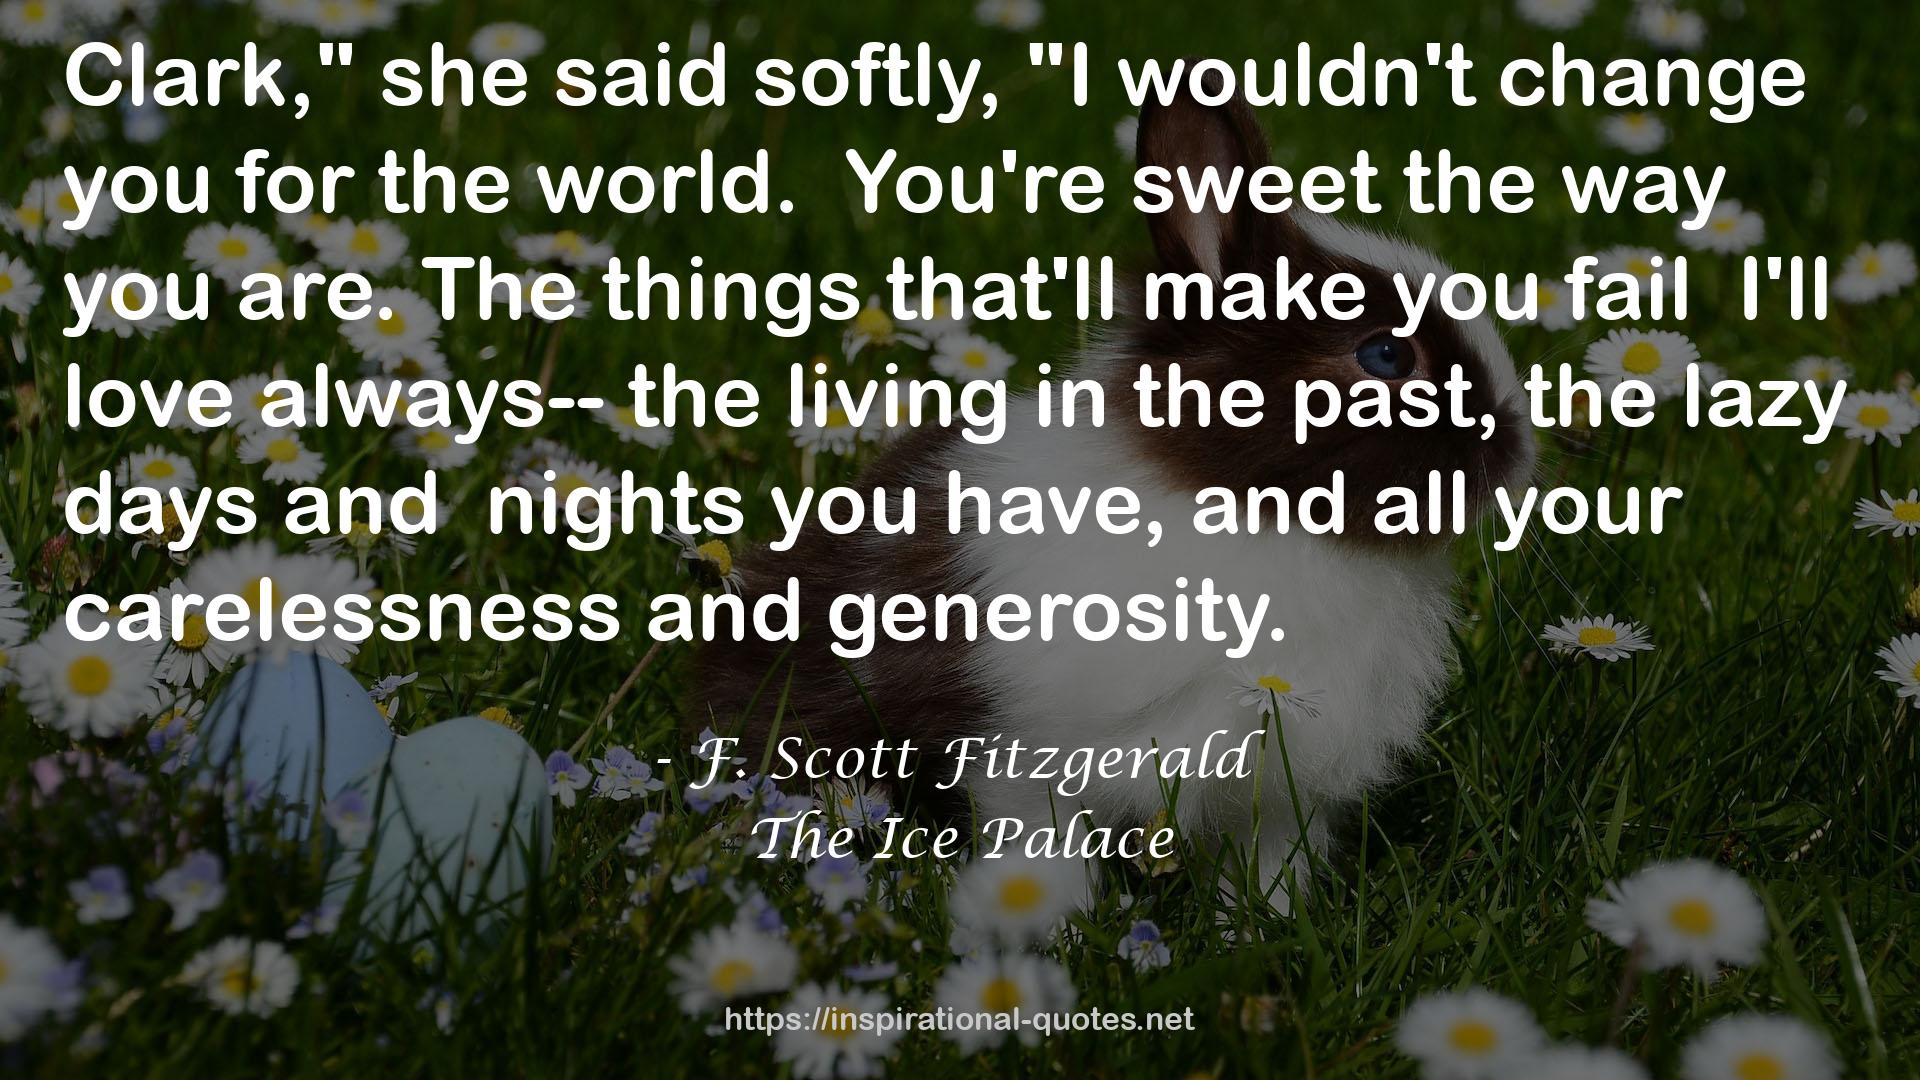 The Ice Palace QUOTES